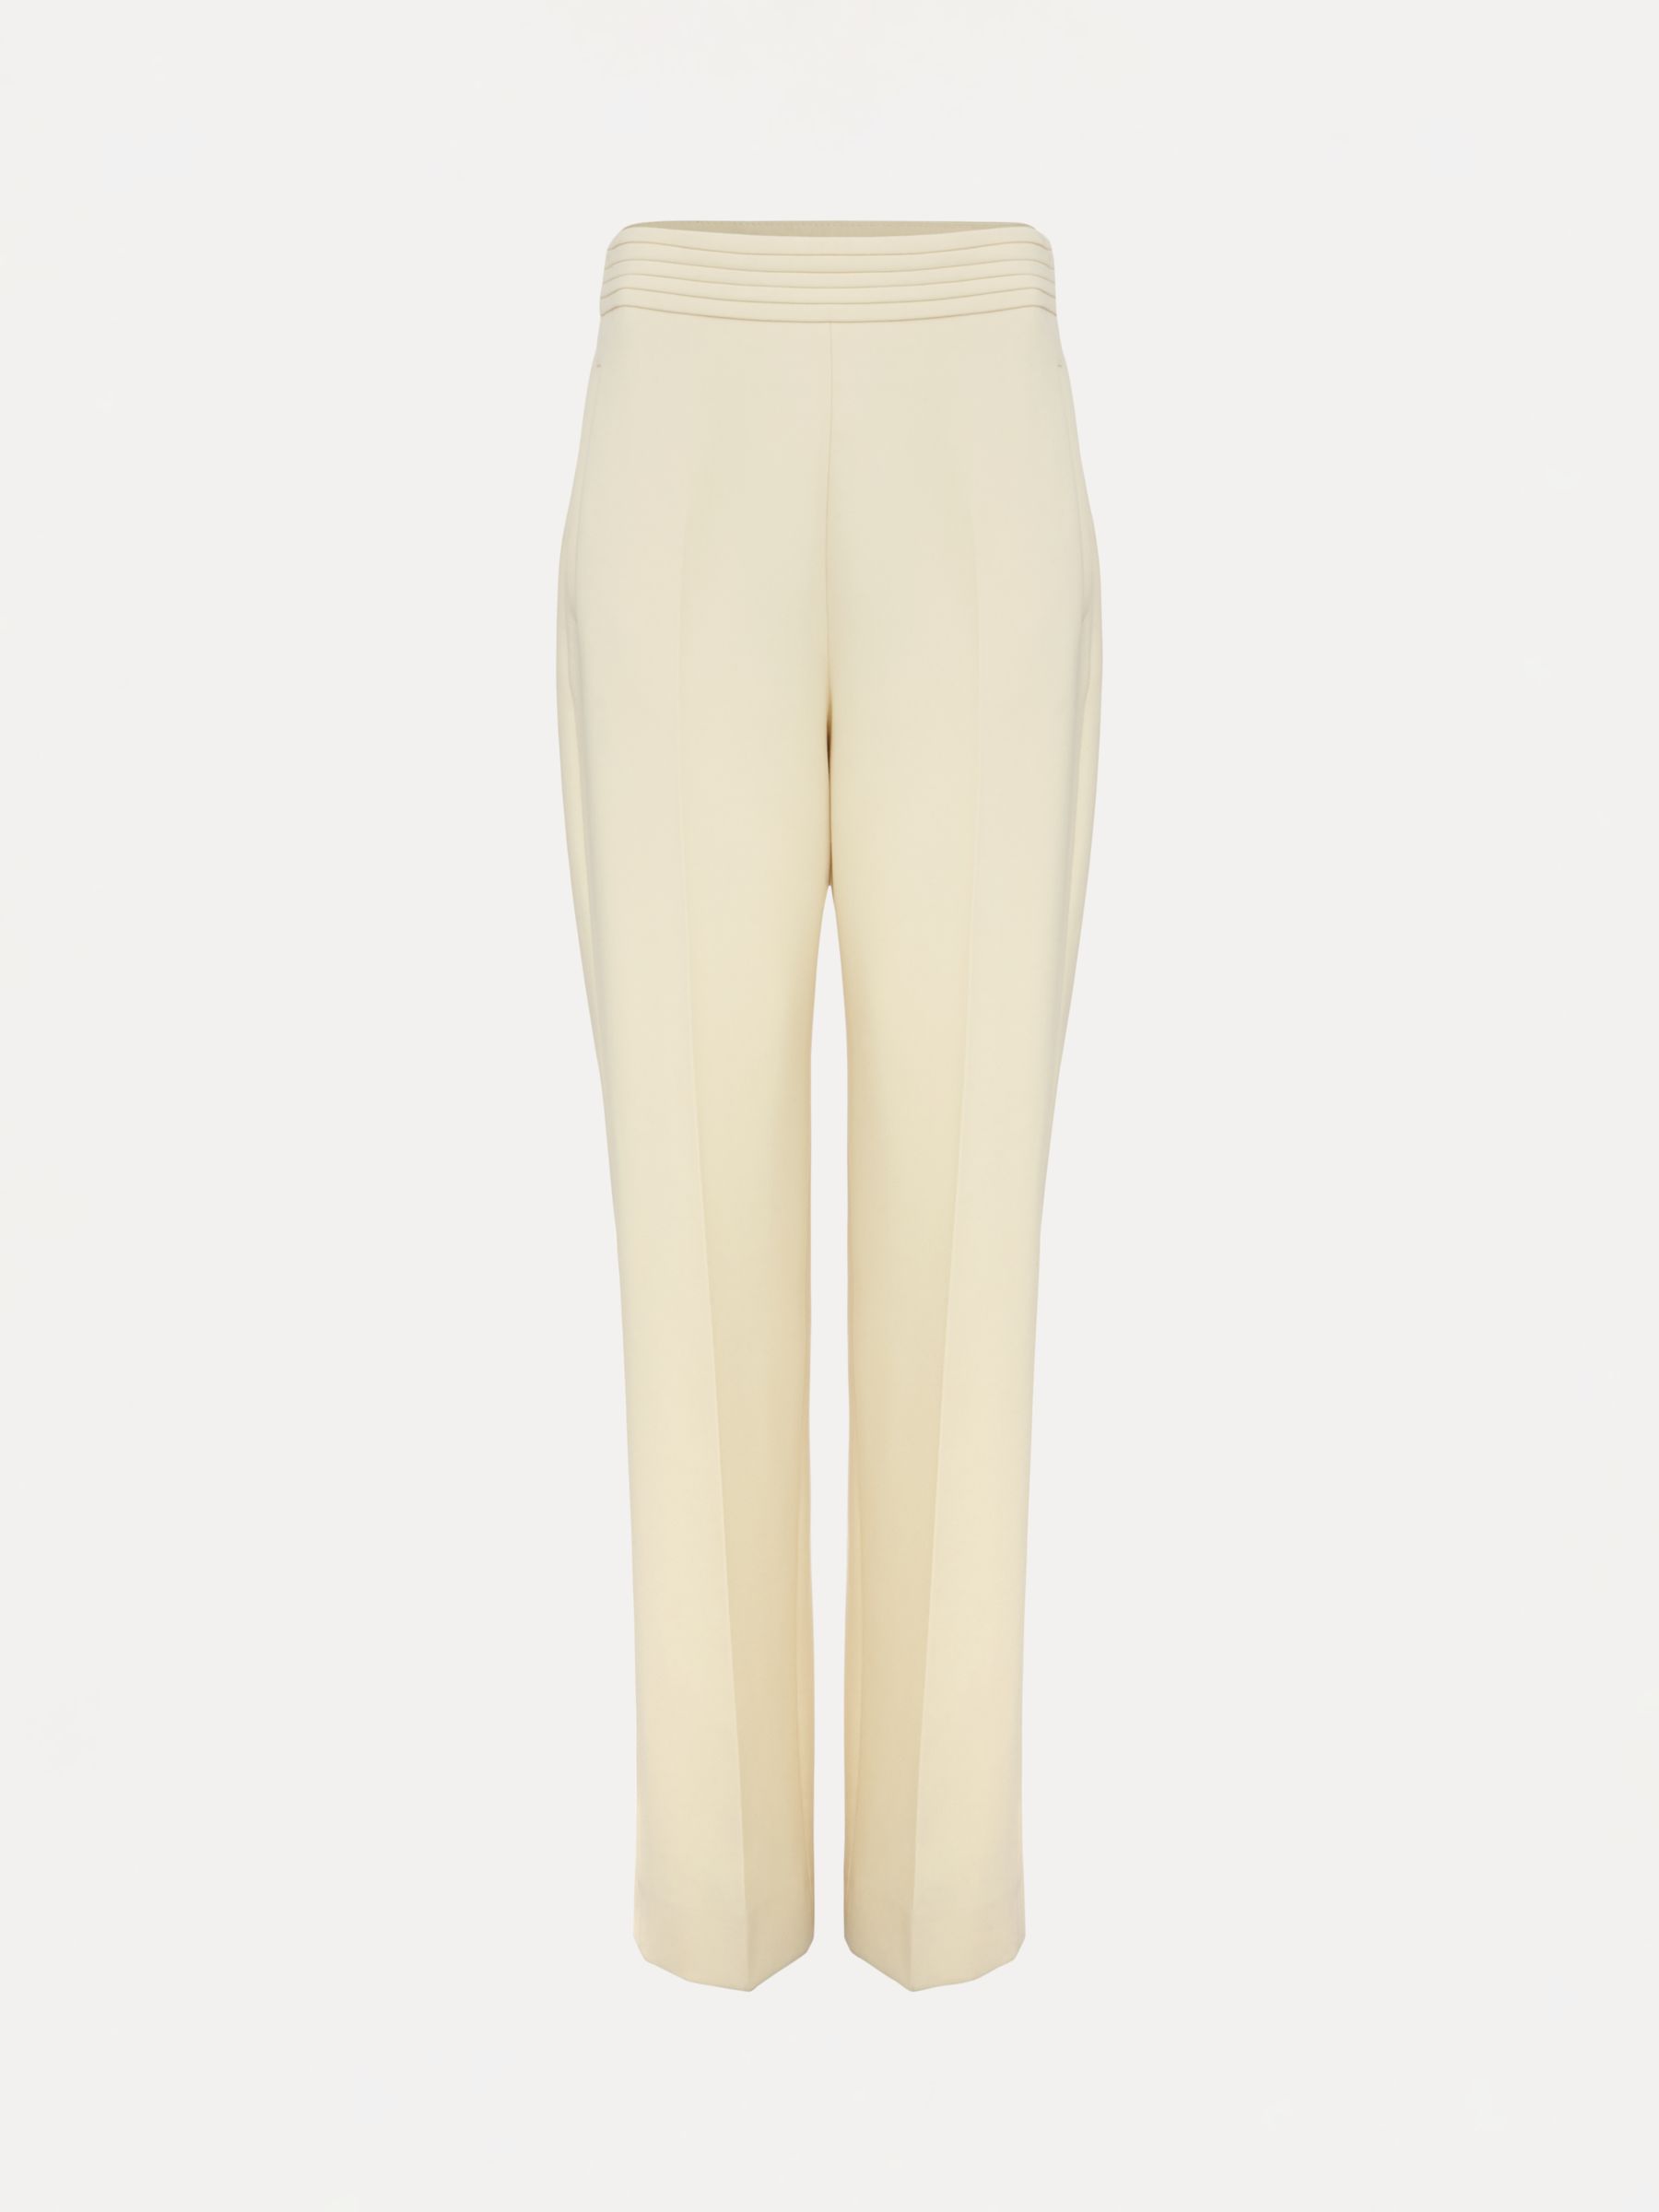 Phase Eight Alexis Pleat Waistband Trousers, Yellow, 6